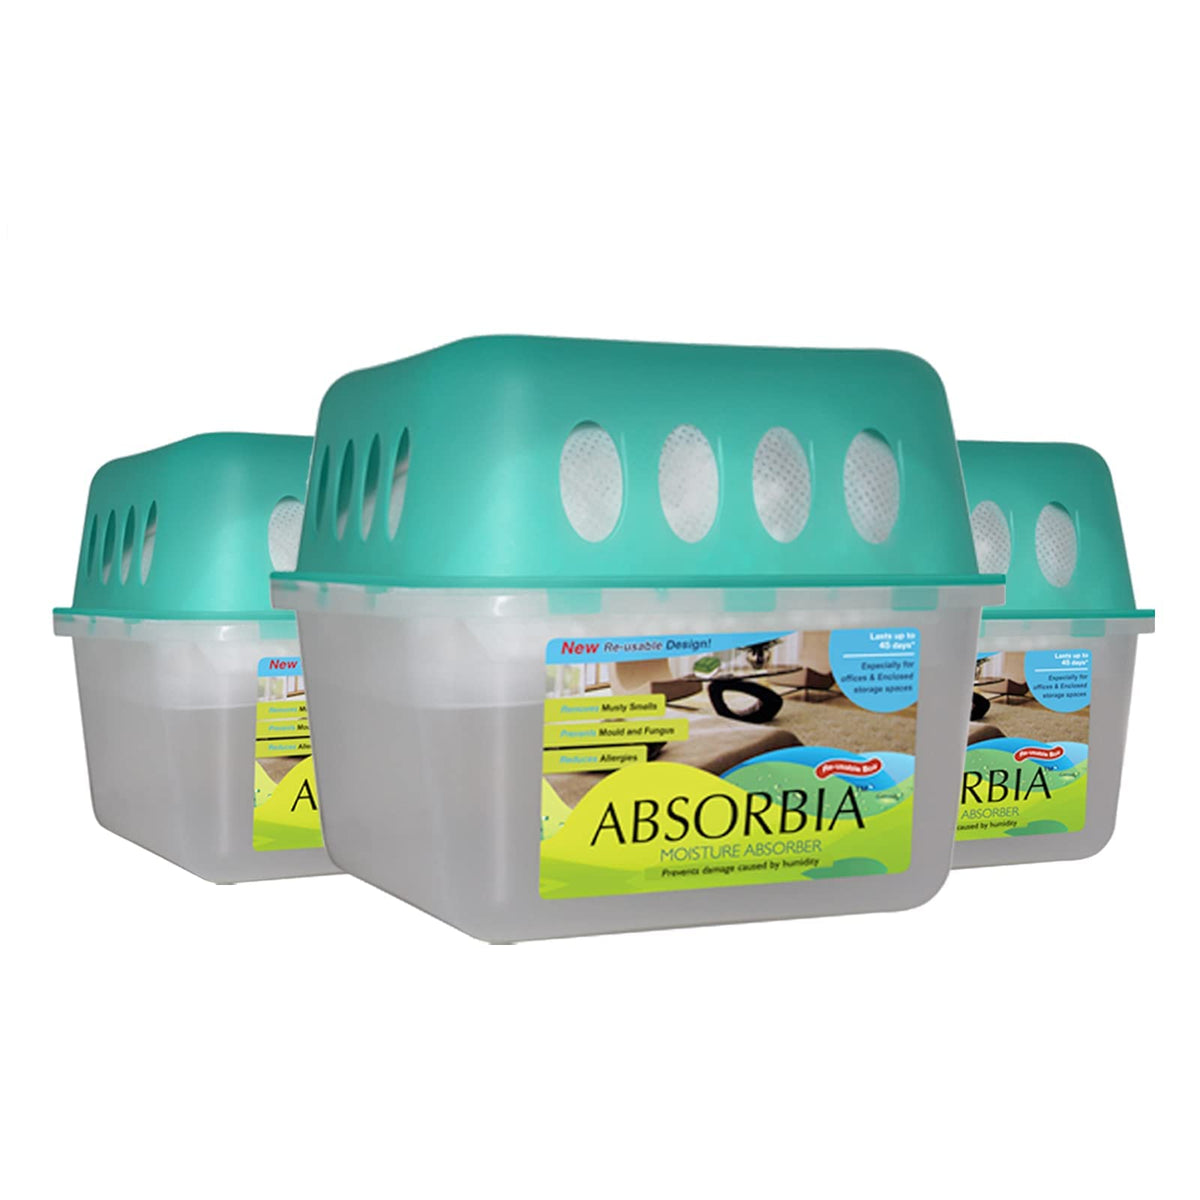 Absorbia Moisture Absorber |Absorbia Reusable Box w/Refill - Pack of 3 X 10 (800ml) | Dehumidifier for Basement, Storerooms, Spare Rooms & Lofts|Fights Against Moisture, Mould, Fungus & Musty Smells